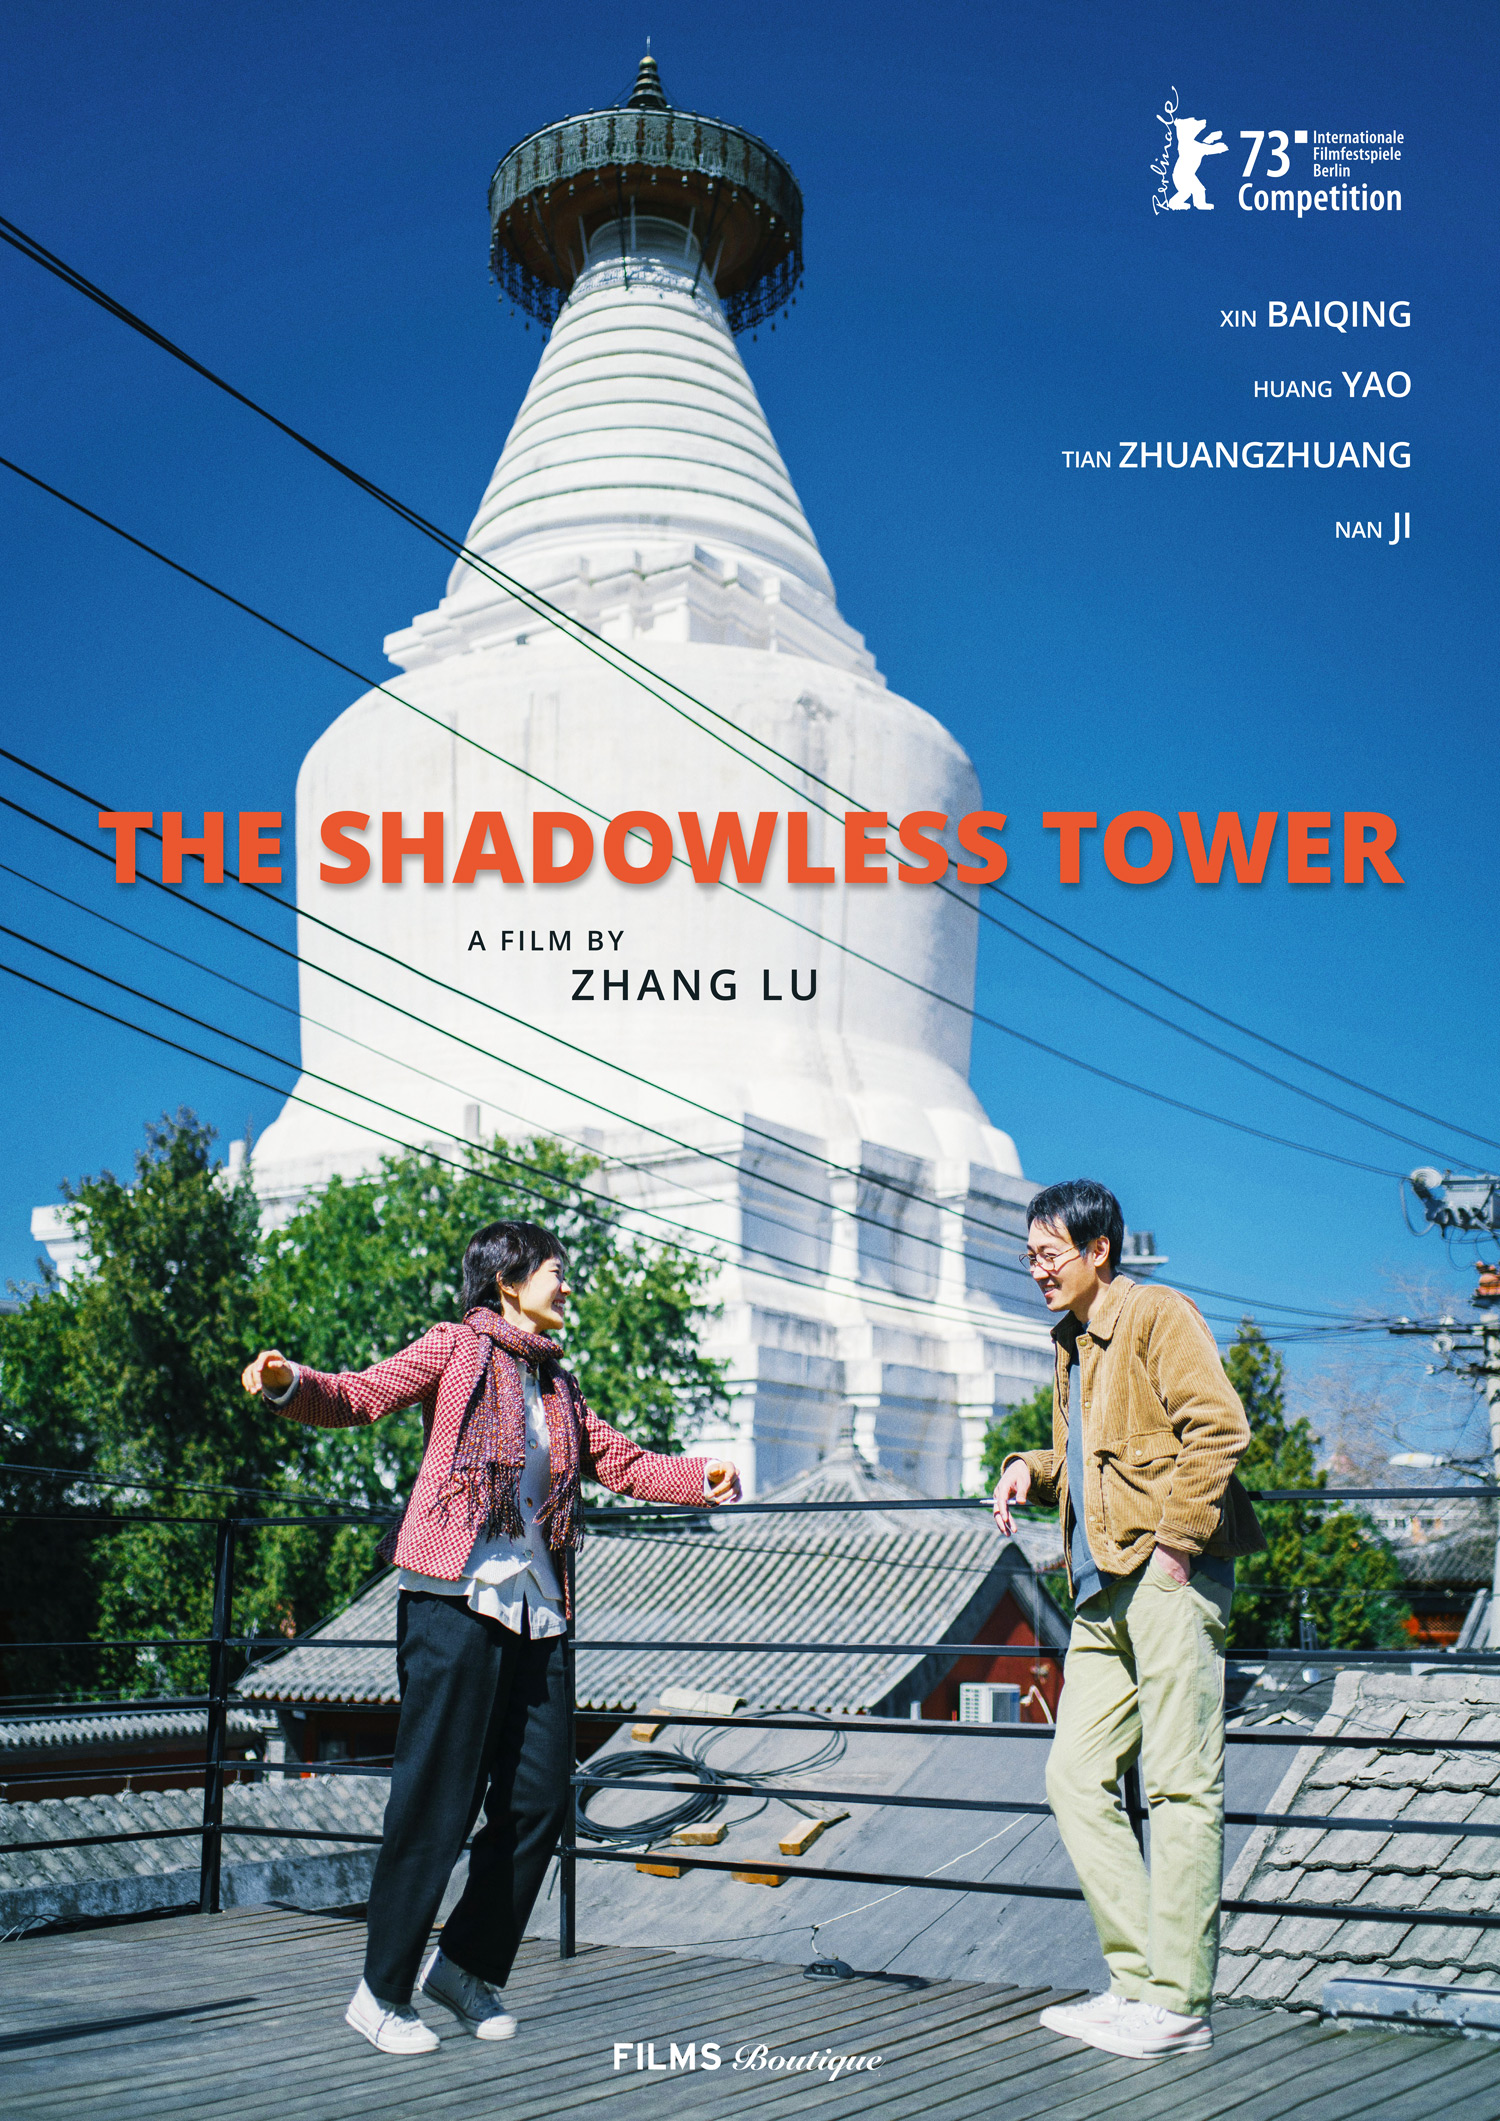 The Shadowless Tower - Films Boutique